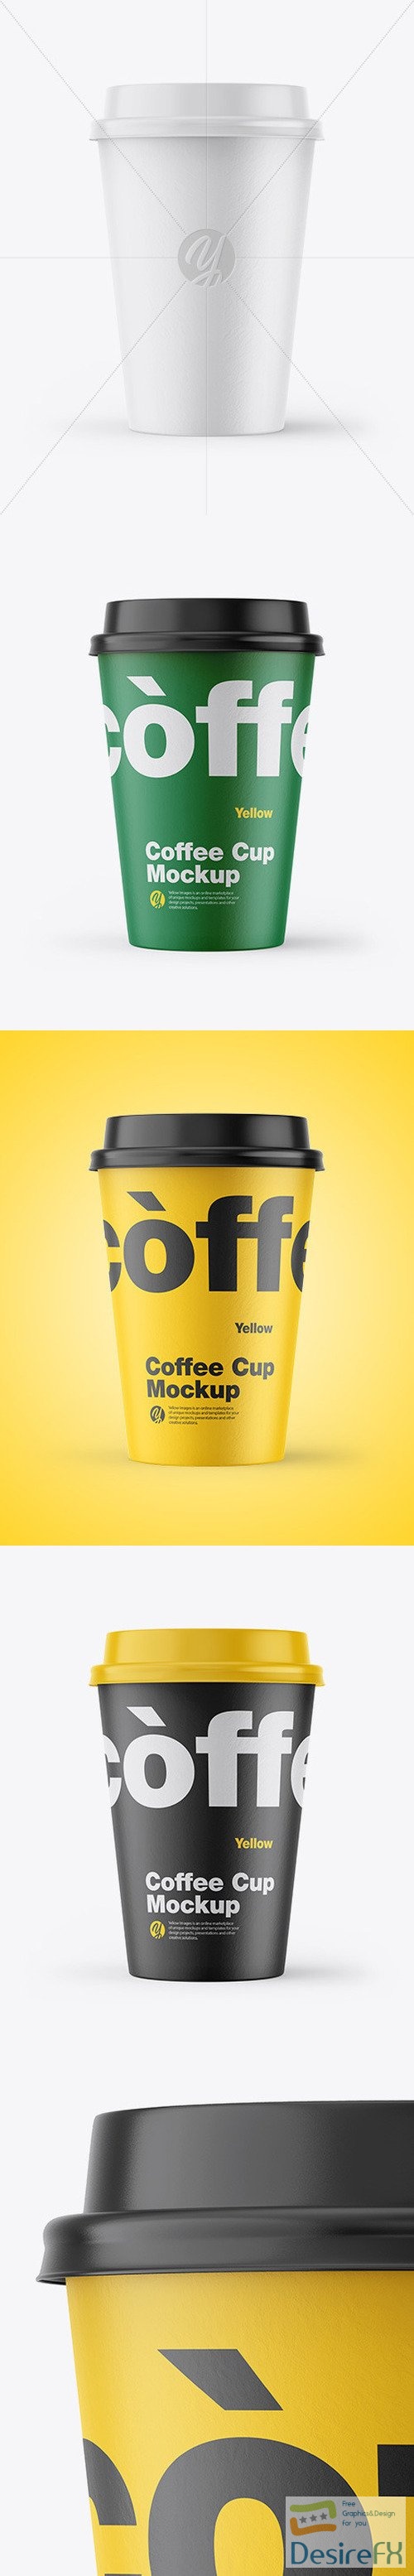 Paper Coffee Cup Mockup 45937